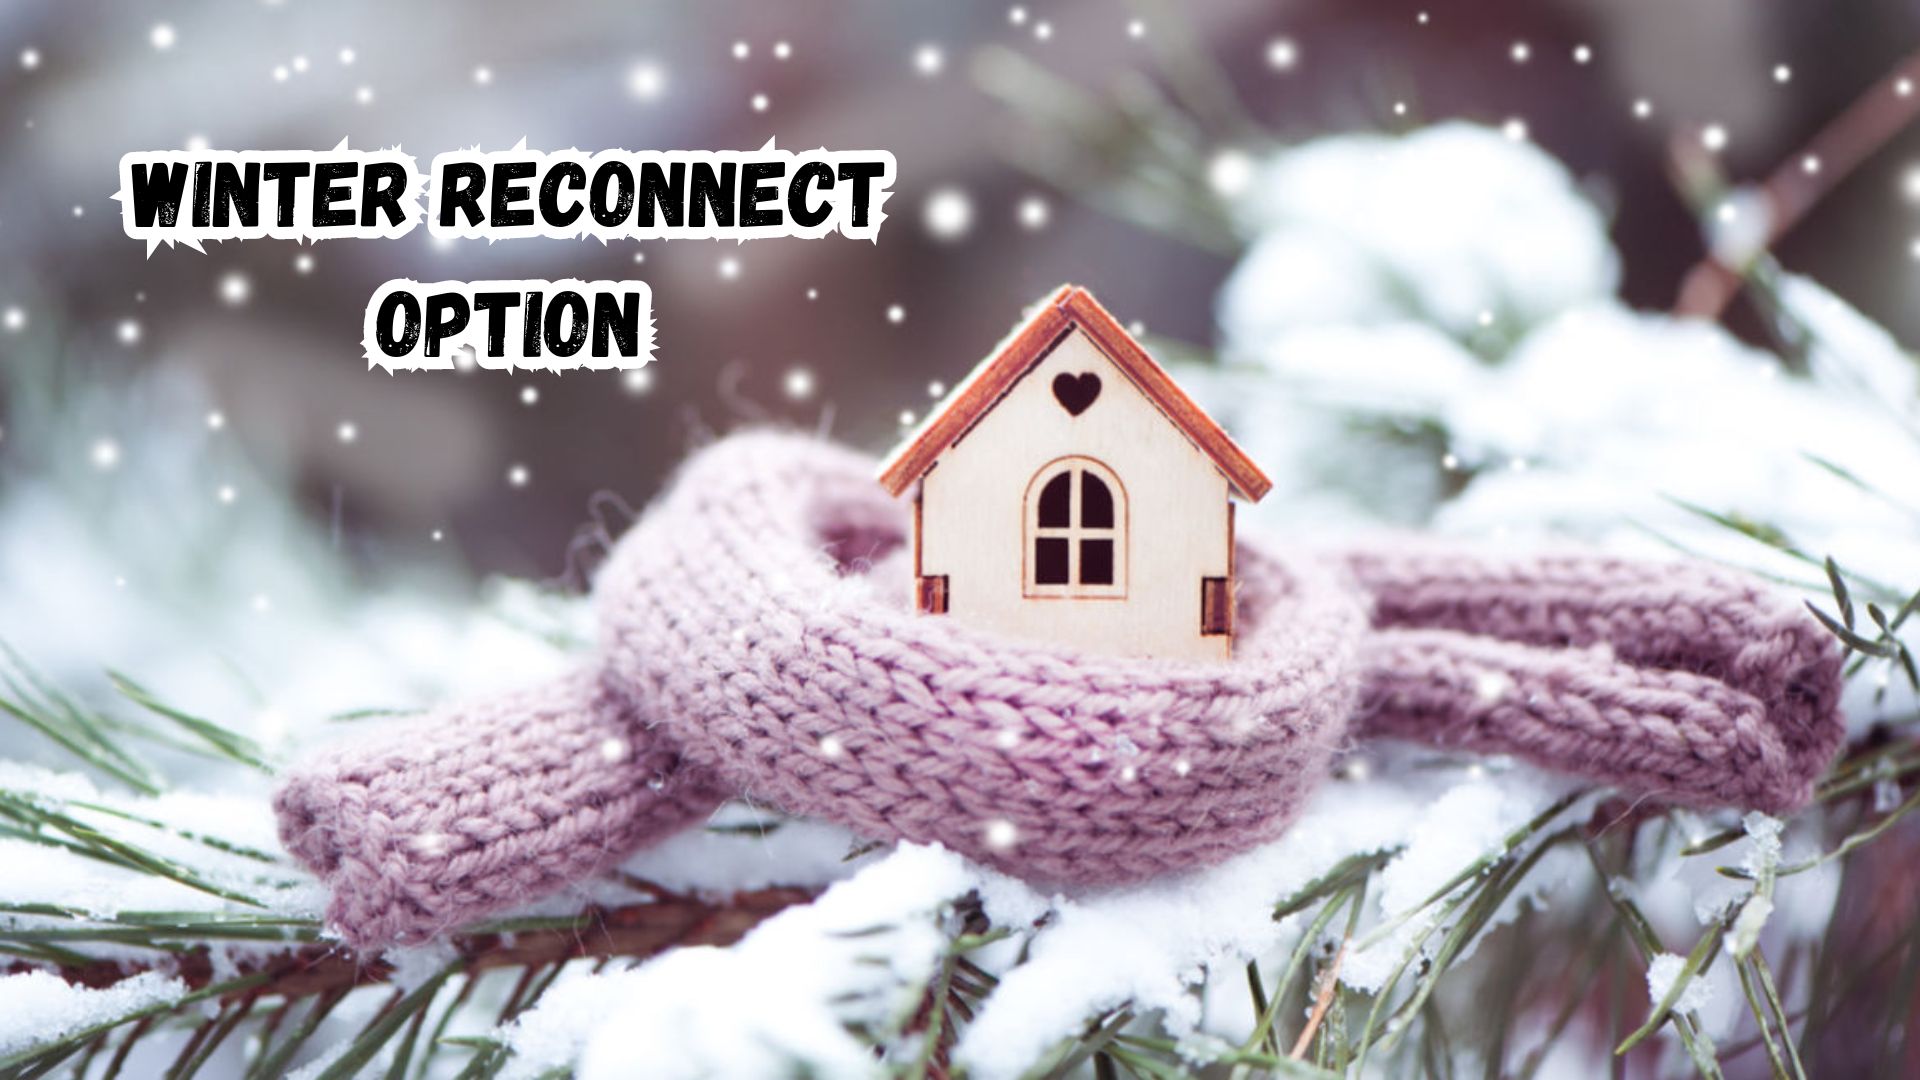 Winter Reconnect Option.